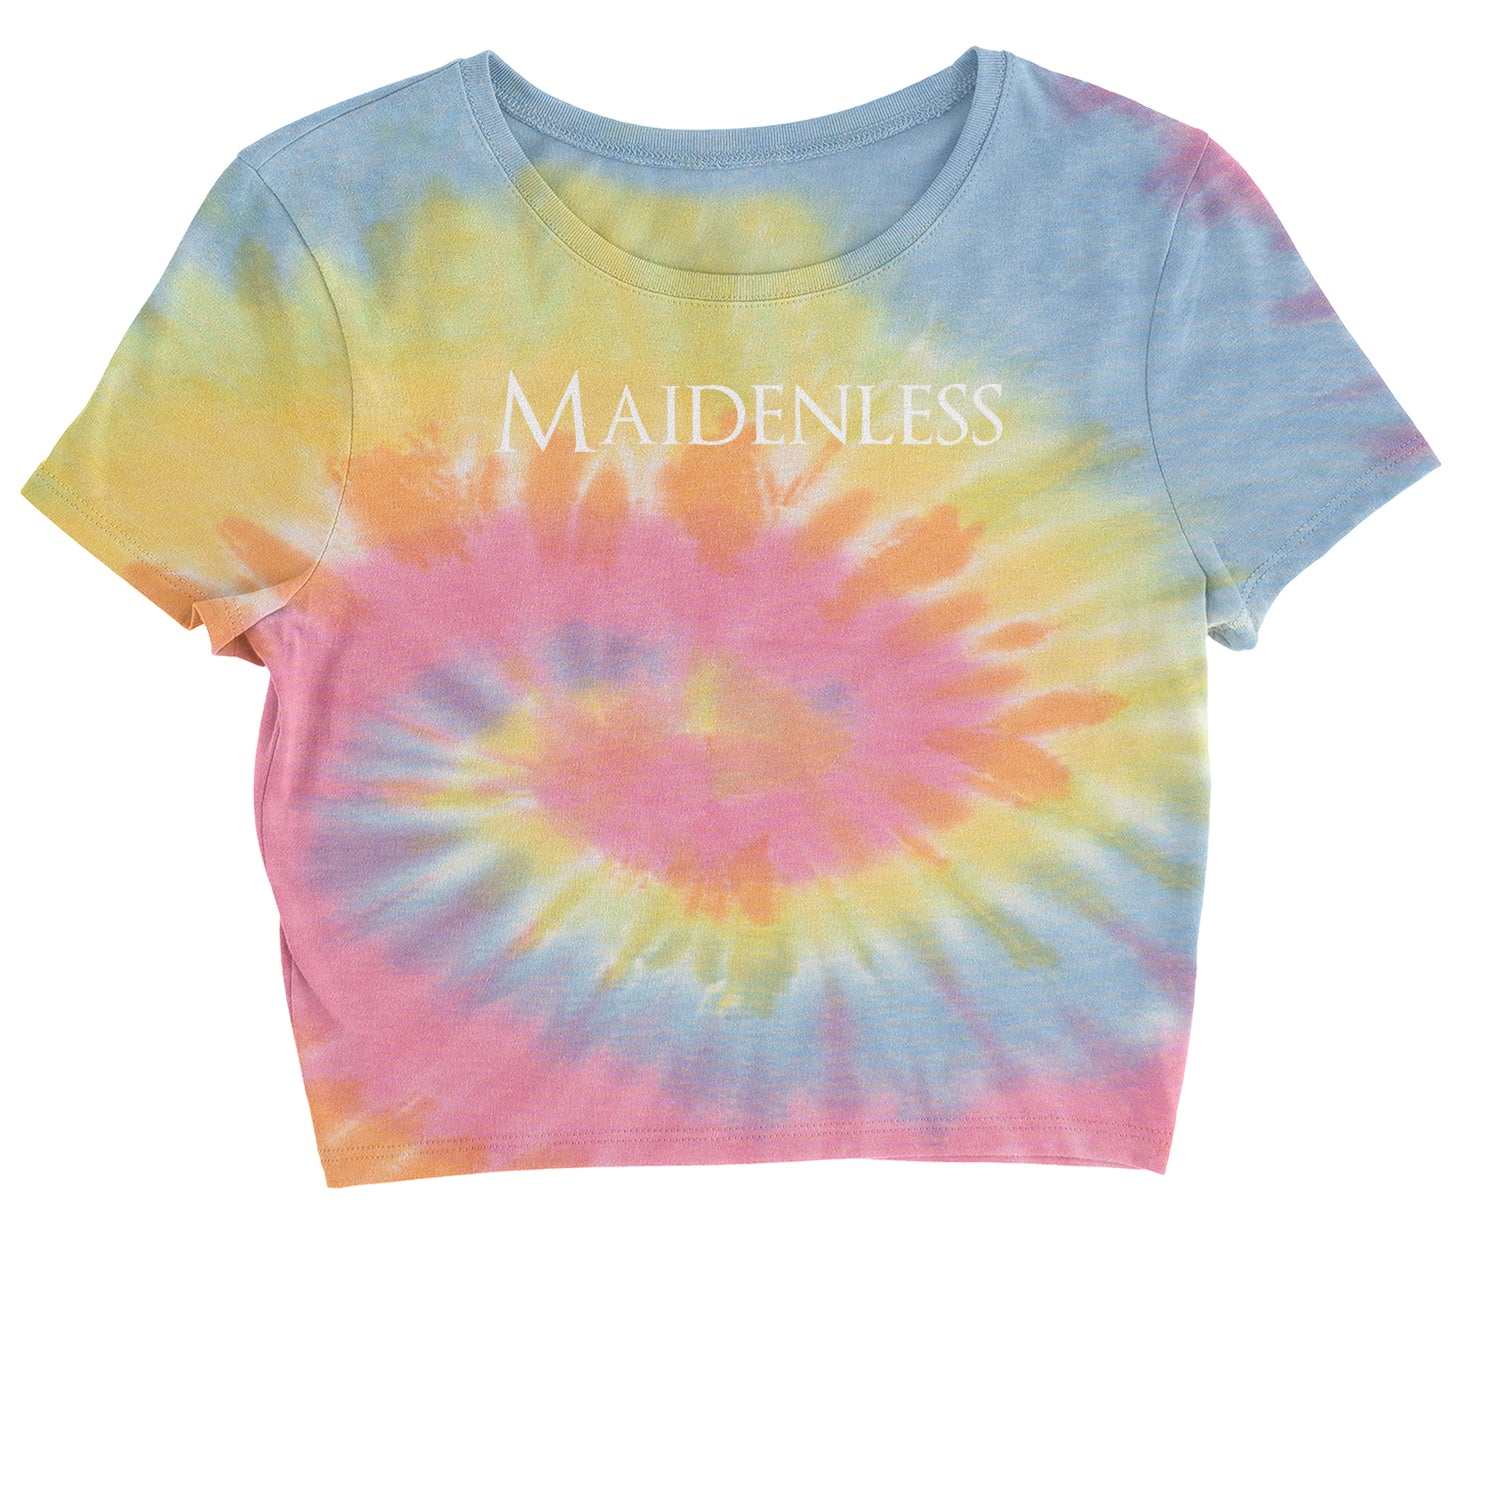 Maidenless Cropped T-Shirt elden, game, video by Expression Tees